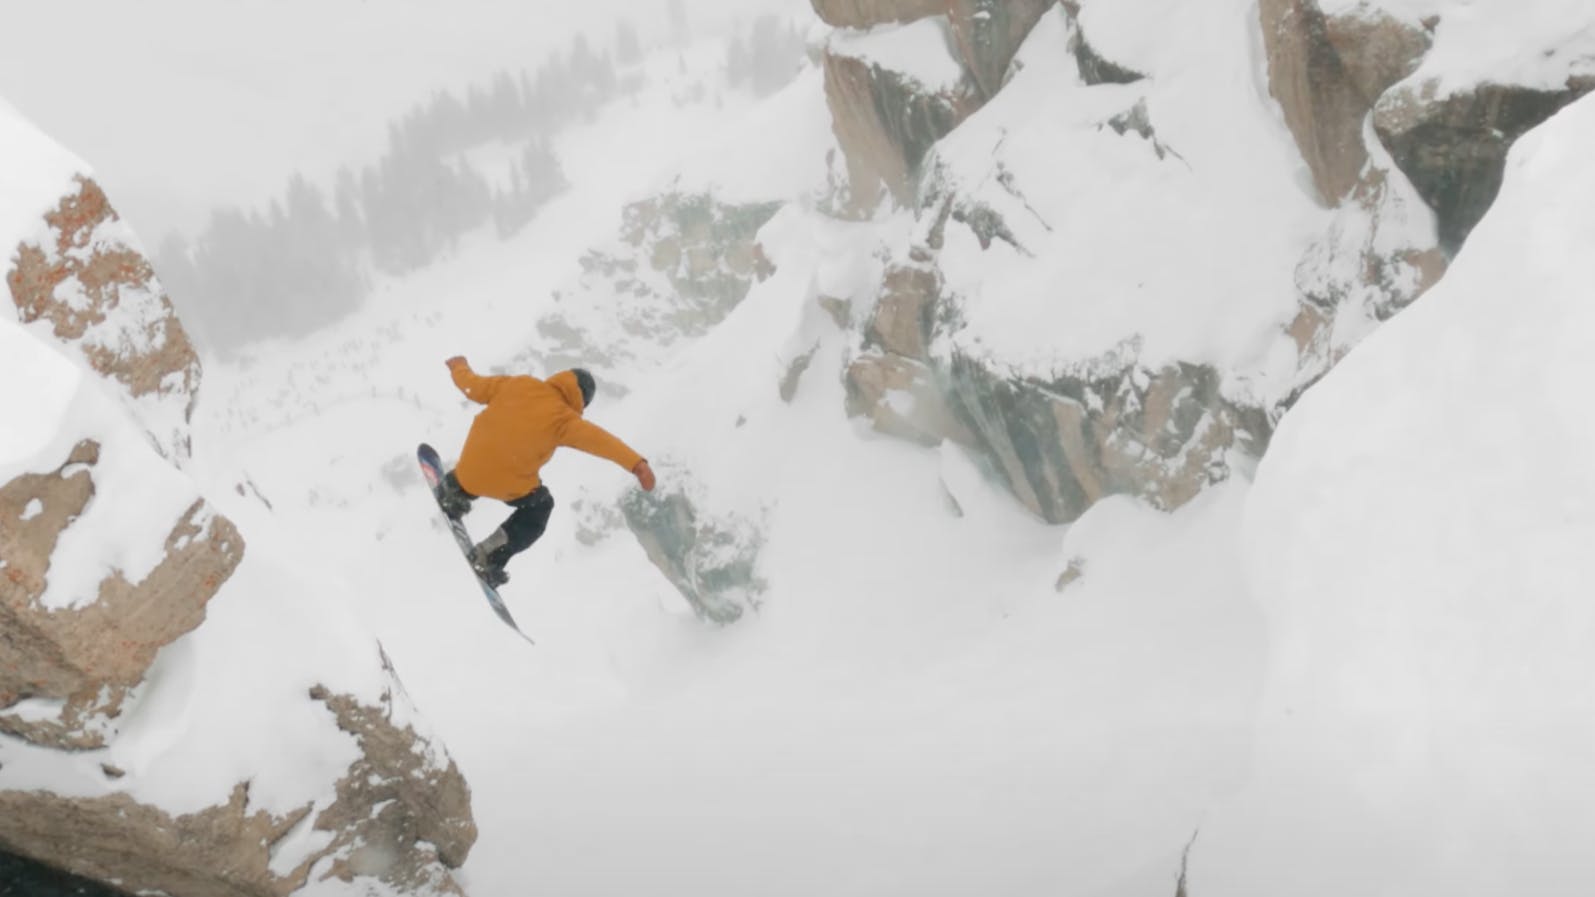 A snowboarder drops into Corbet's couloir. He is wearing an orange jacket.